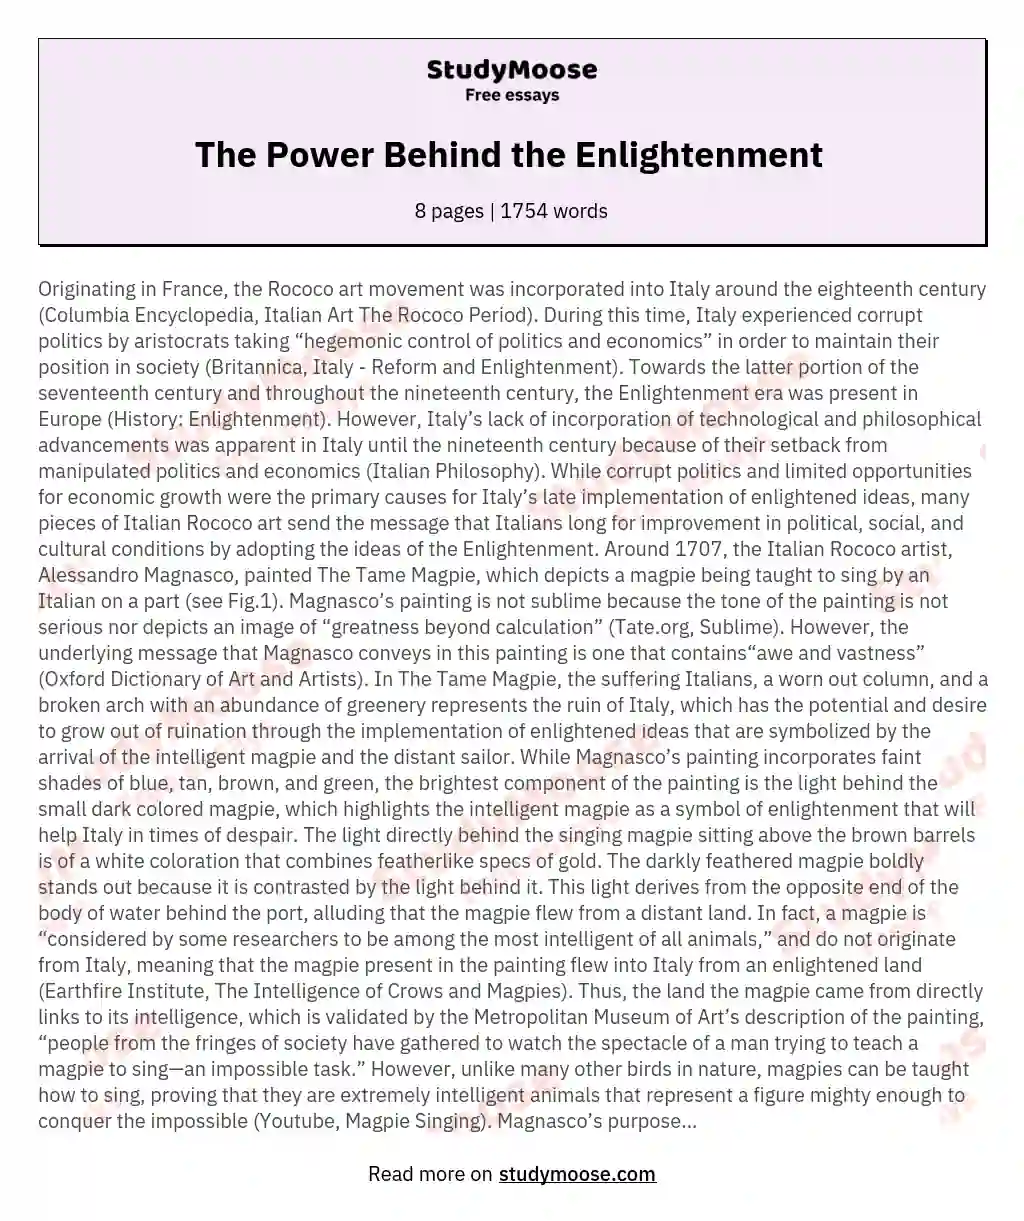 The Power Behind the Enlightenment  essay